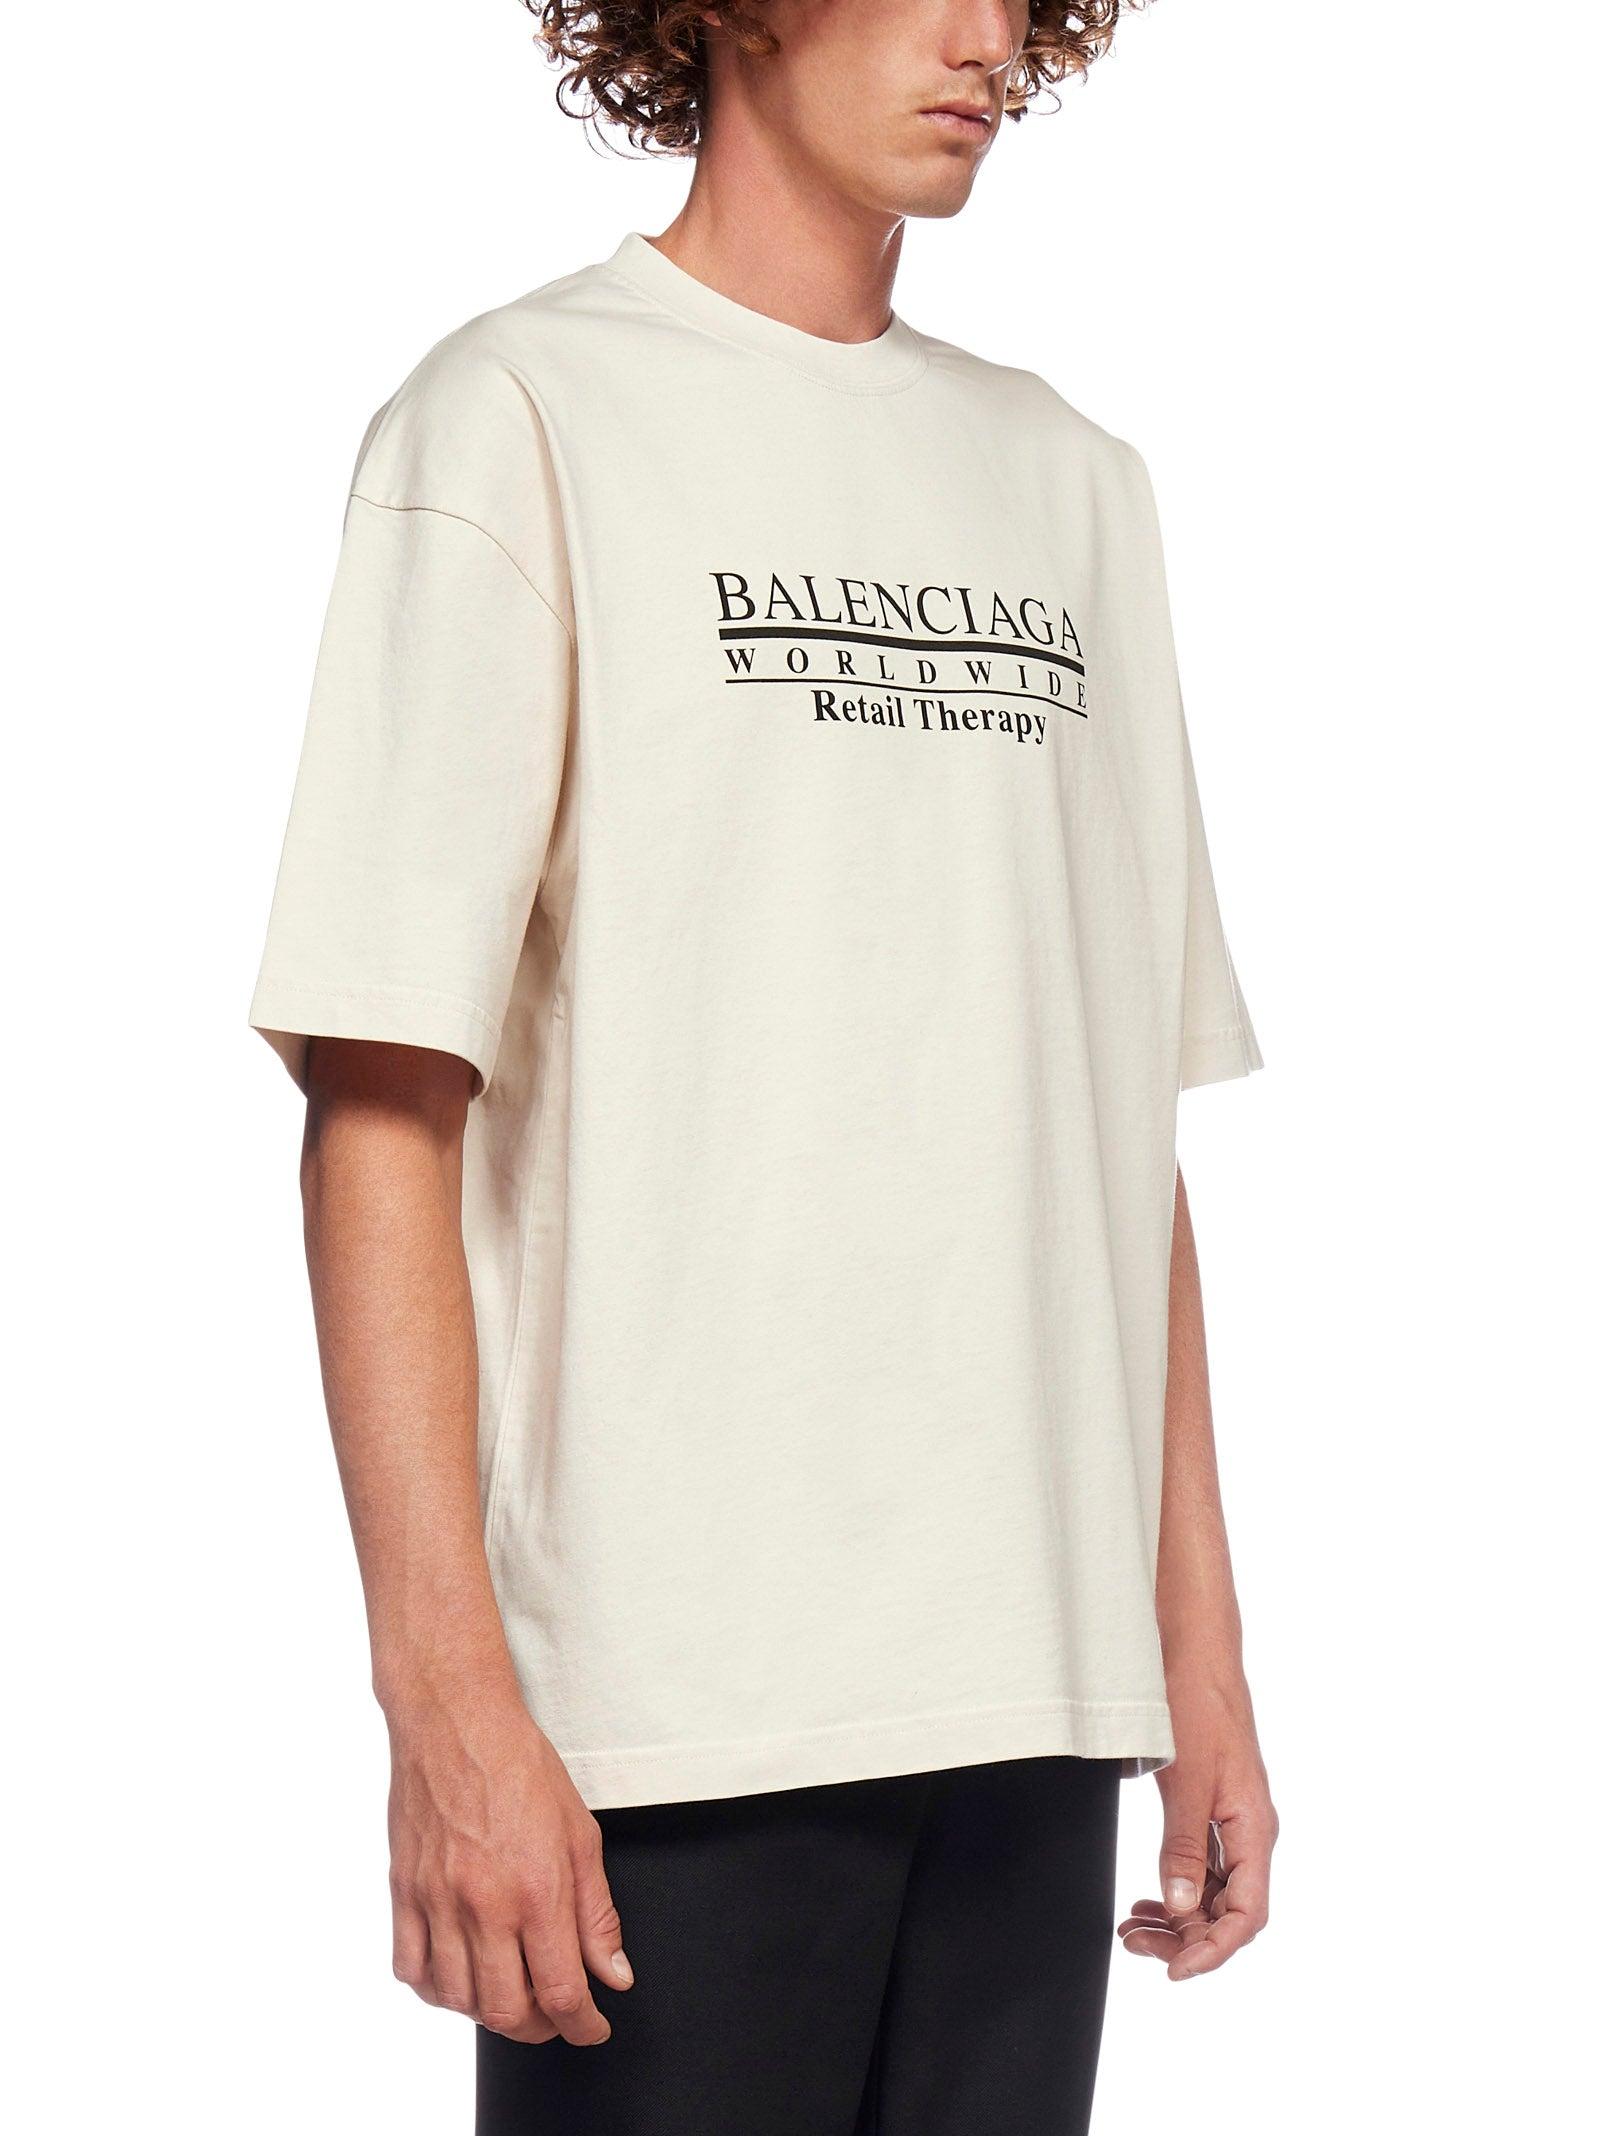 Balenciaga Retail Therapy T-shirt in White for Men | Lyst